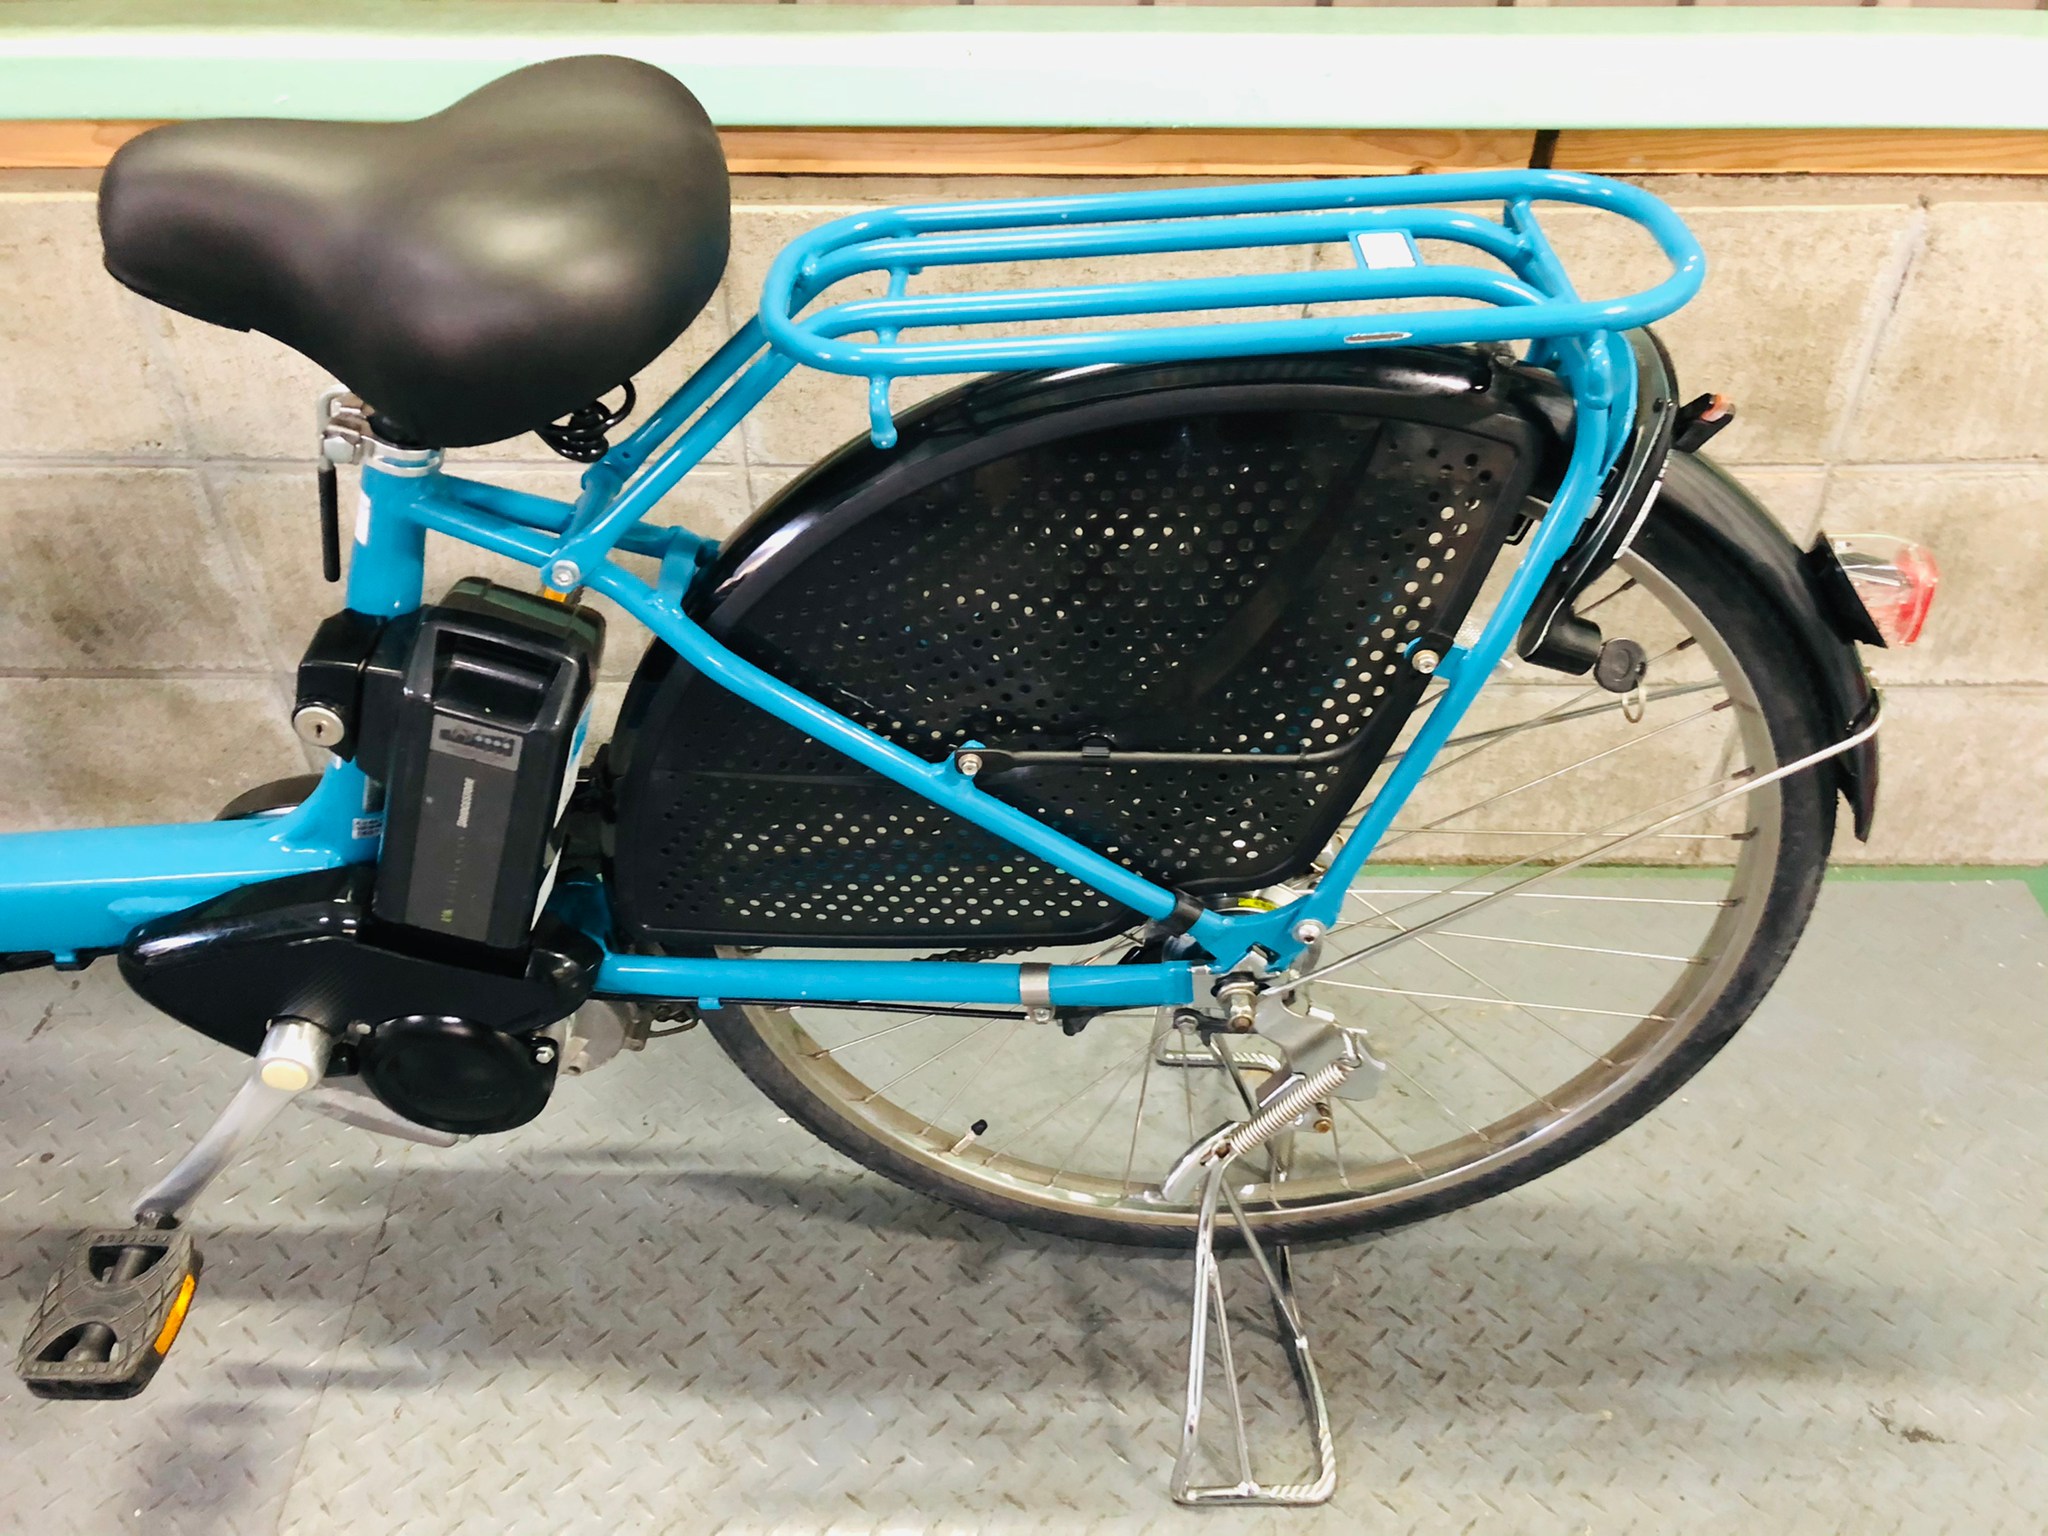 【SOLD OUT】電動自転車 ブリヂストン アンジェリーノ 22/26インチ 8.7Ah 水色 | 国産・中古の激安電動アシスト自転車を販売